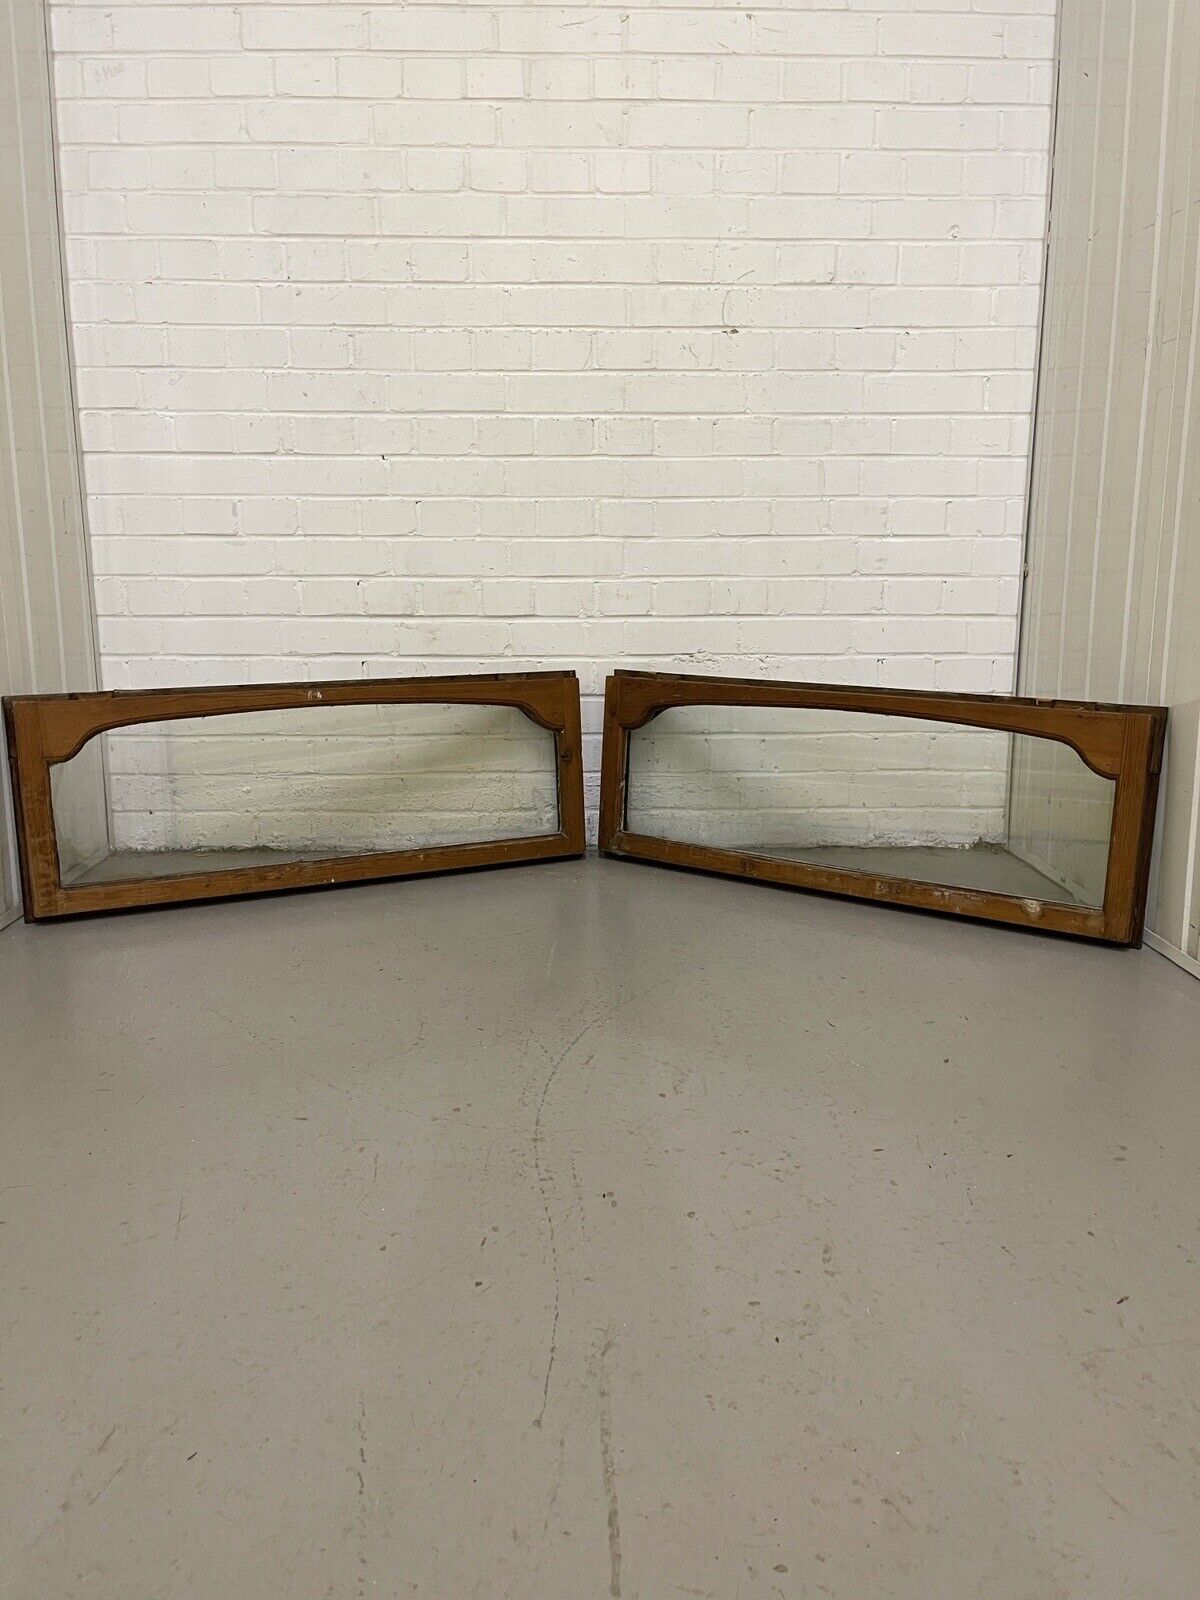 Pair Of Fanlight Arch Double Glazed Wooden Windows 1010 x 373mm 1010 x 373mm